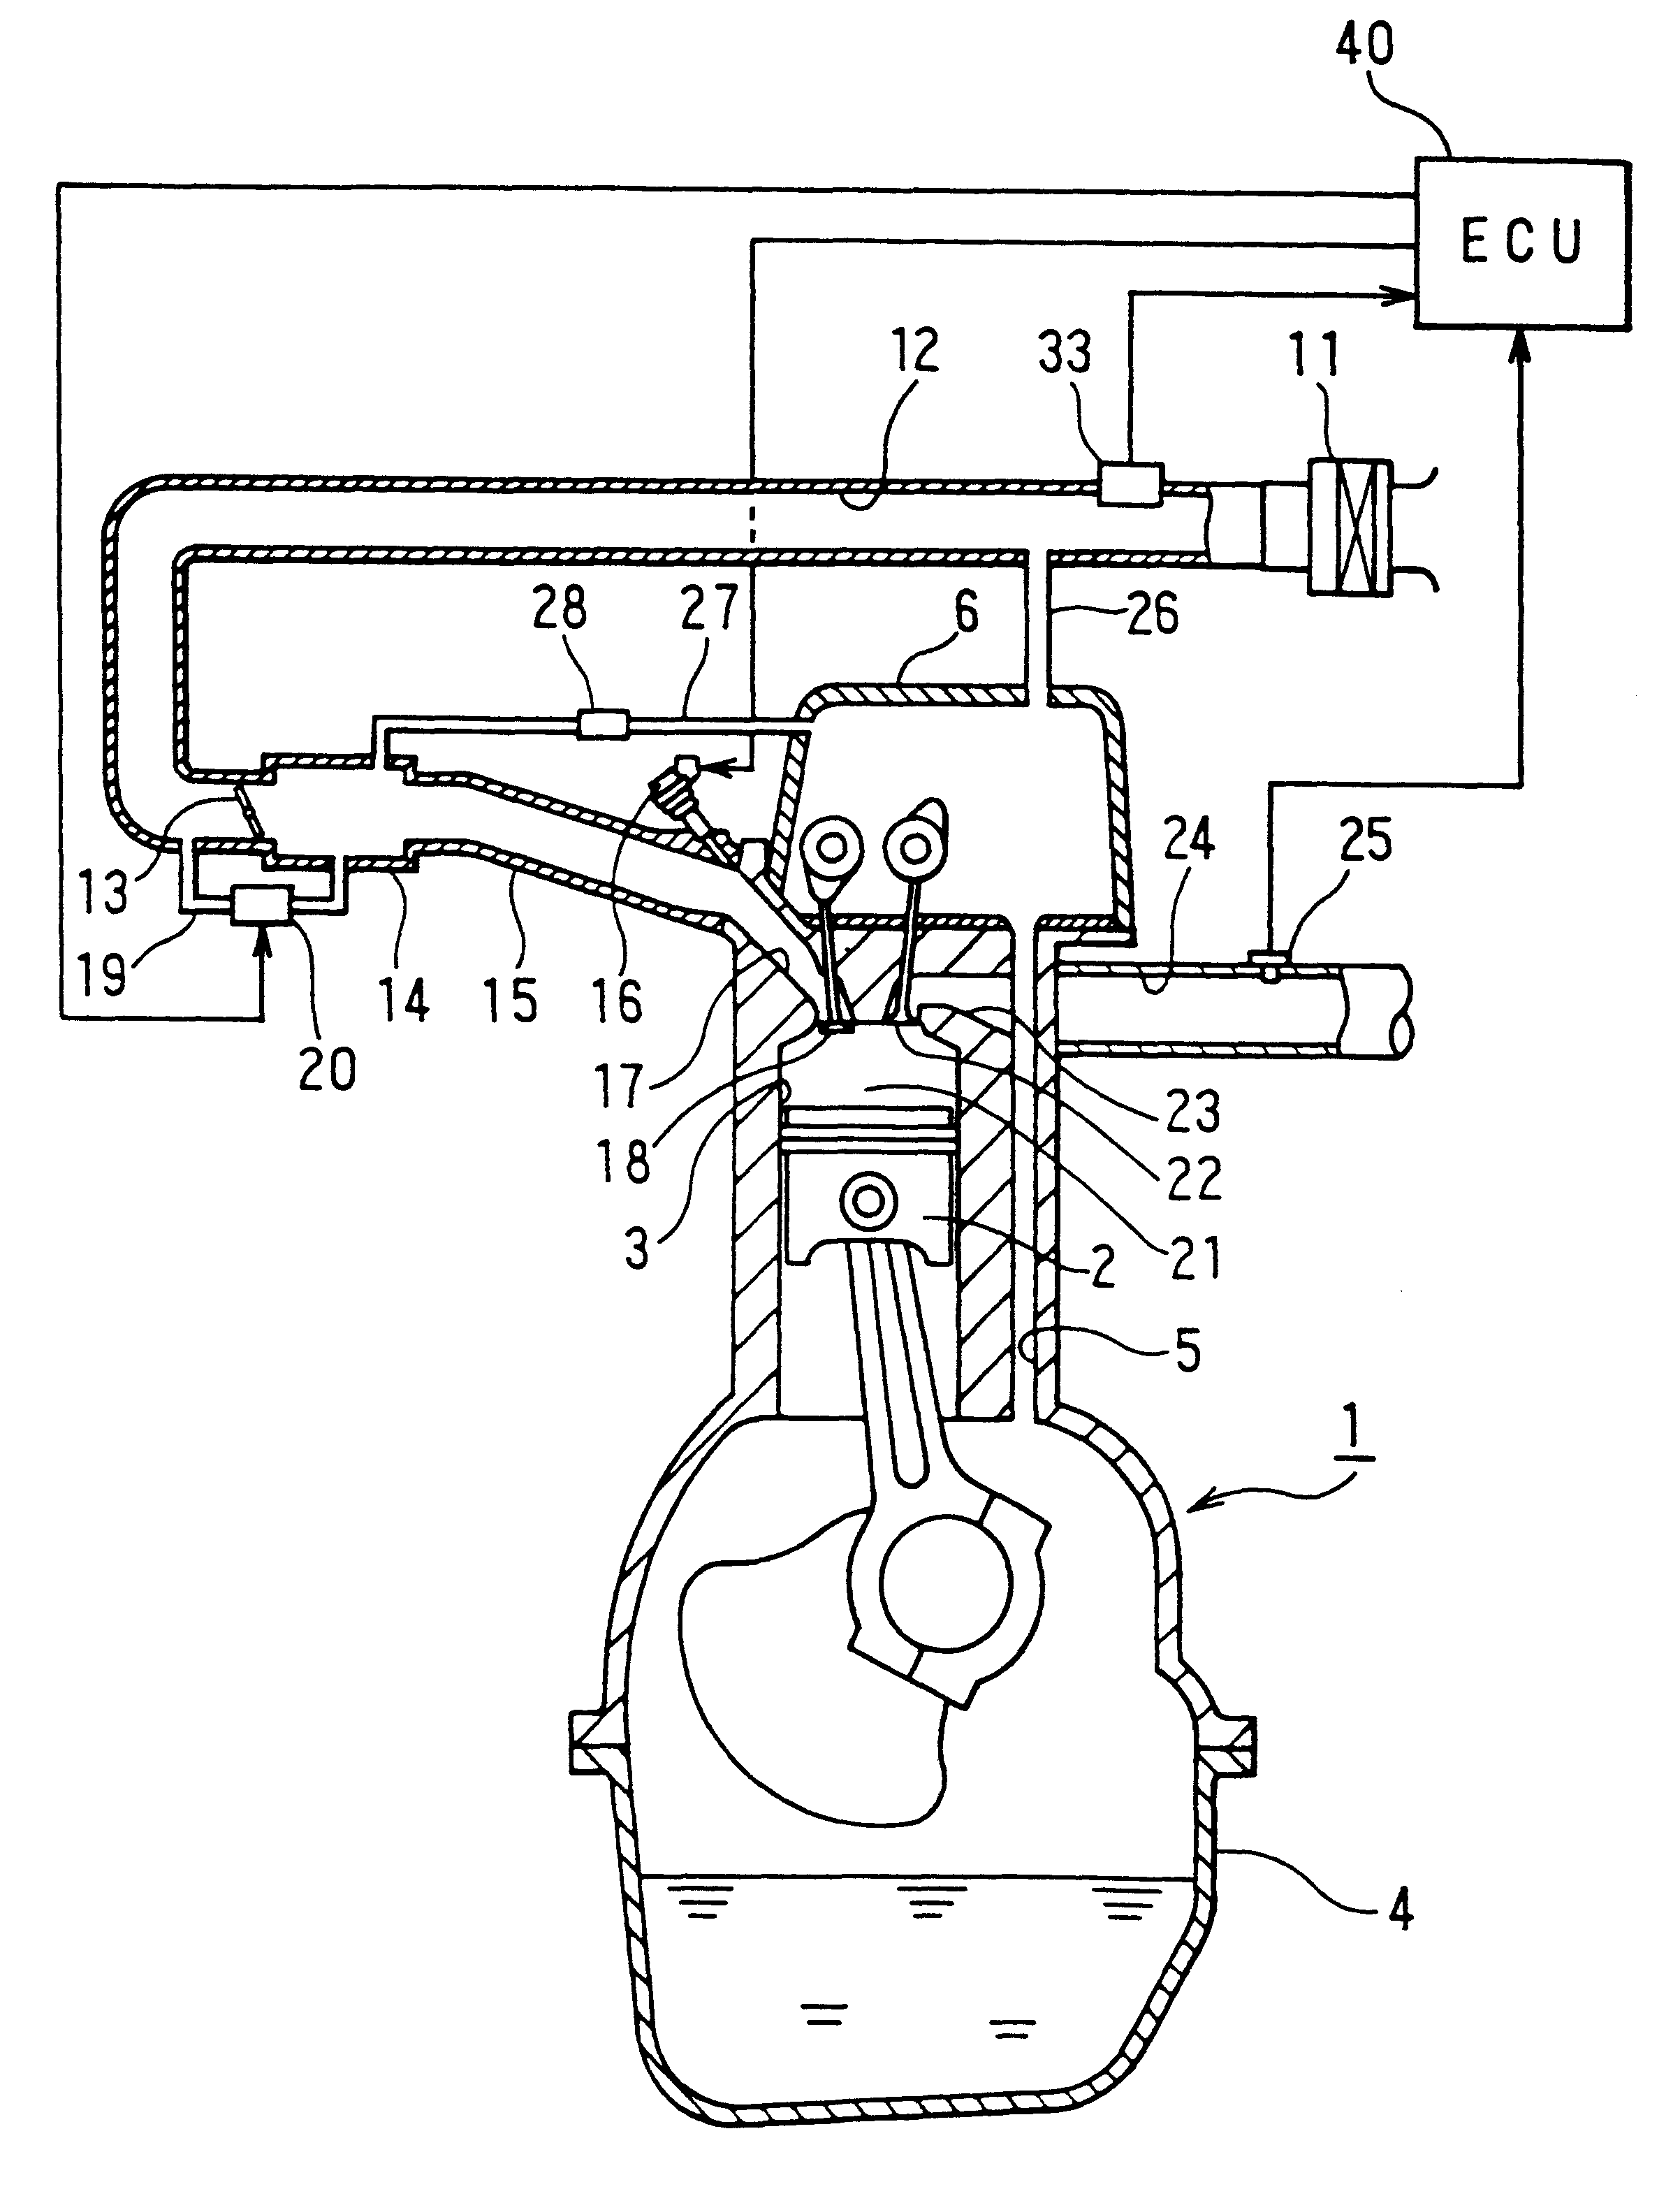 Blow-by gas passage abnormality detecting system for internal combustion engines